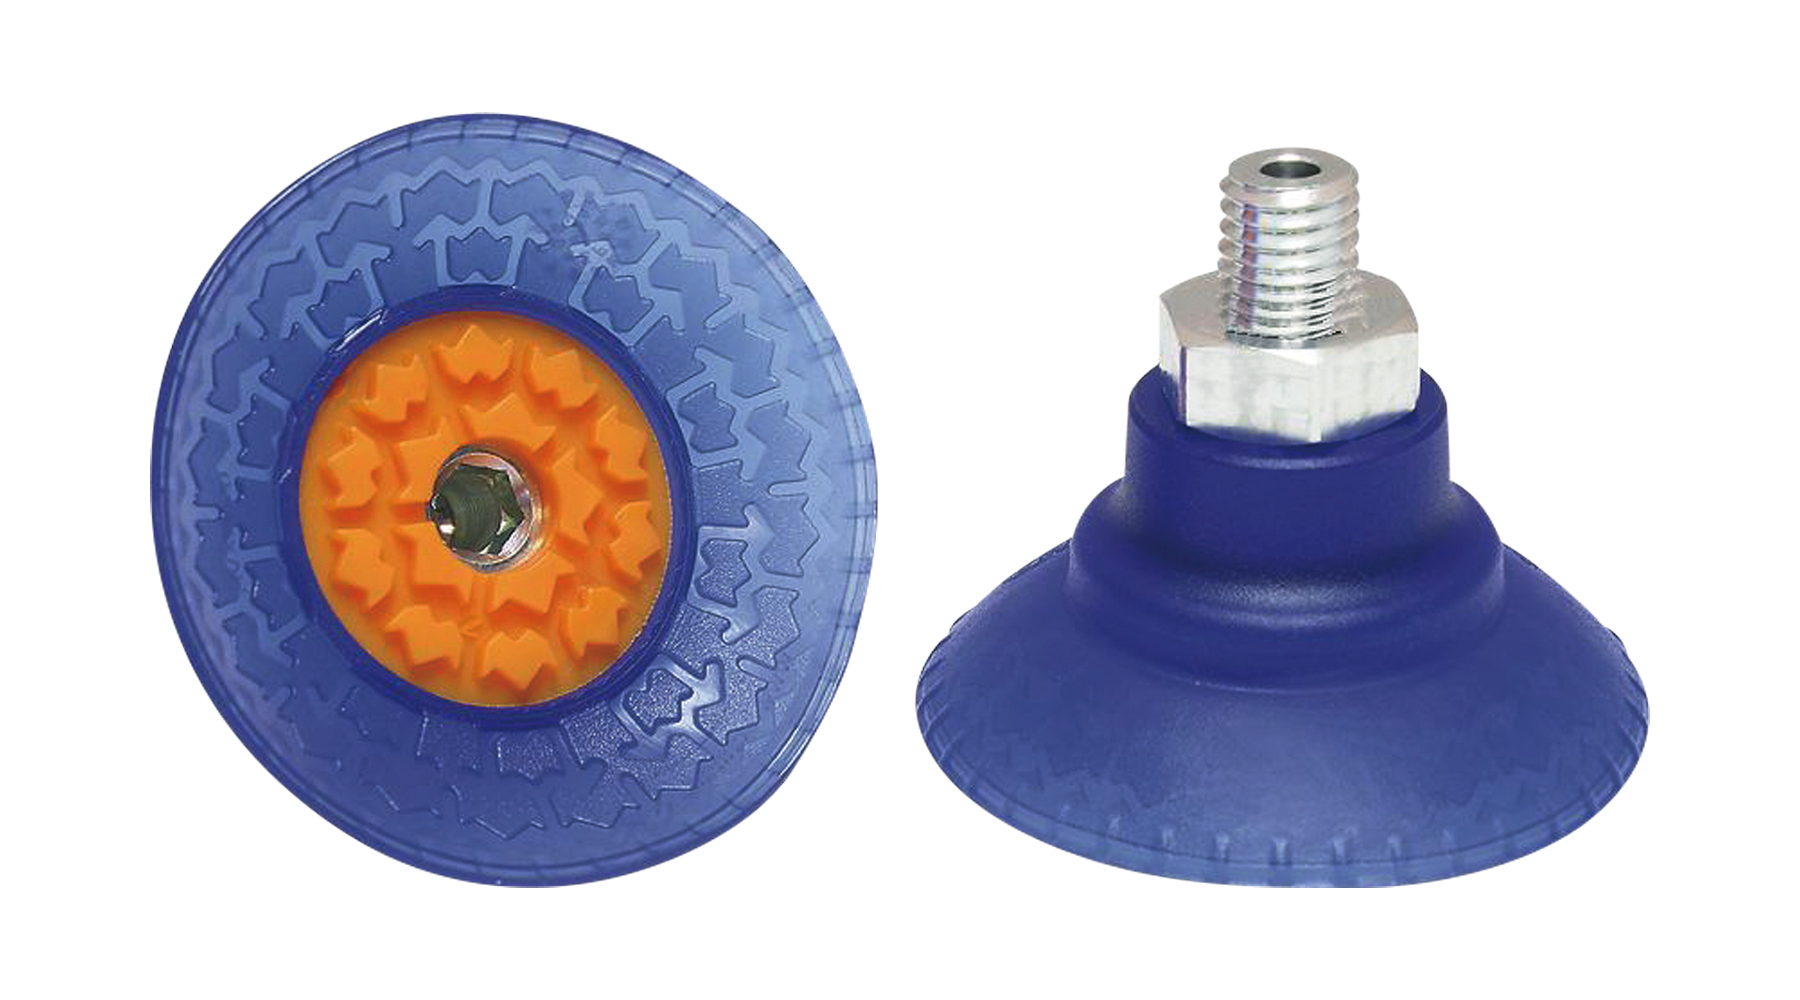 SUCTION CUP(FOR STEEL SHEET W/SCREW)